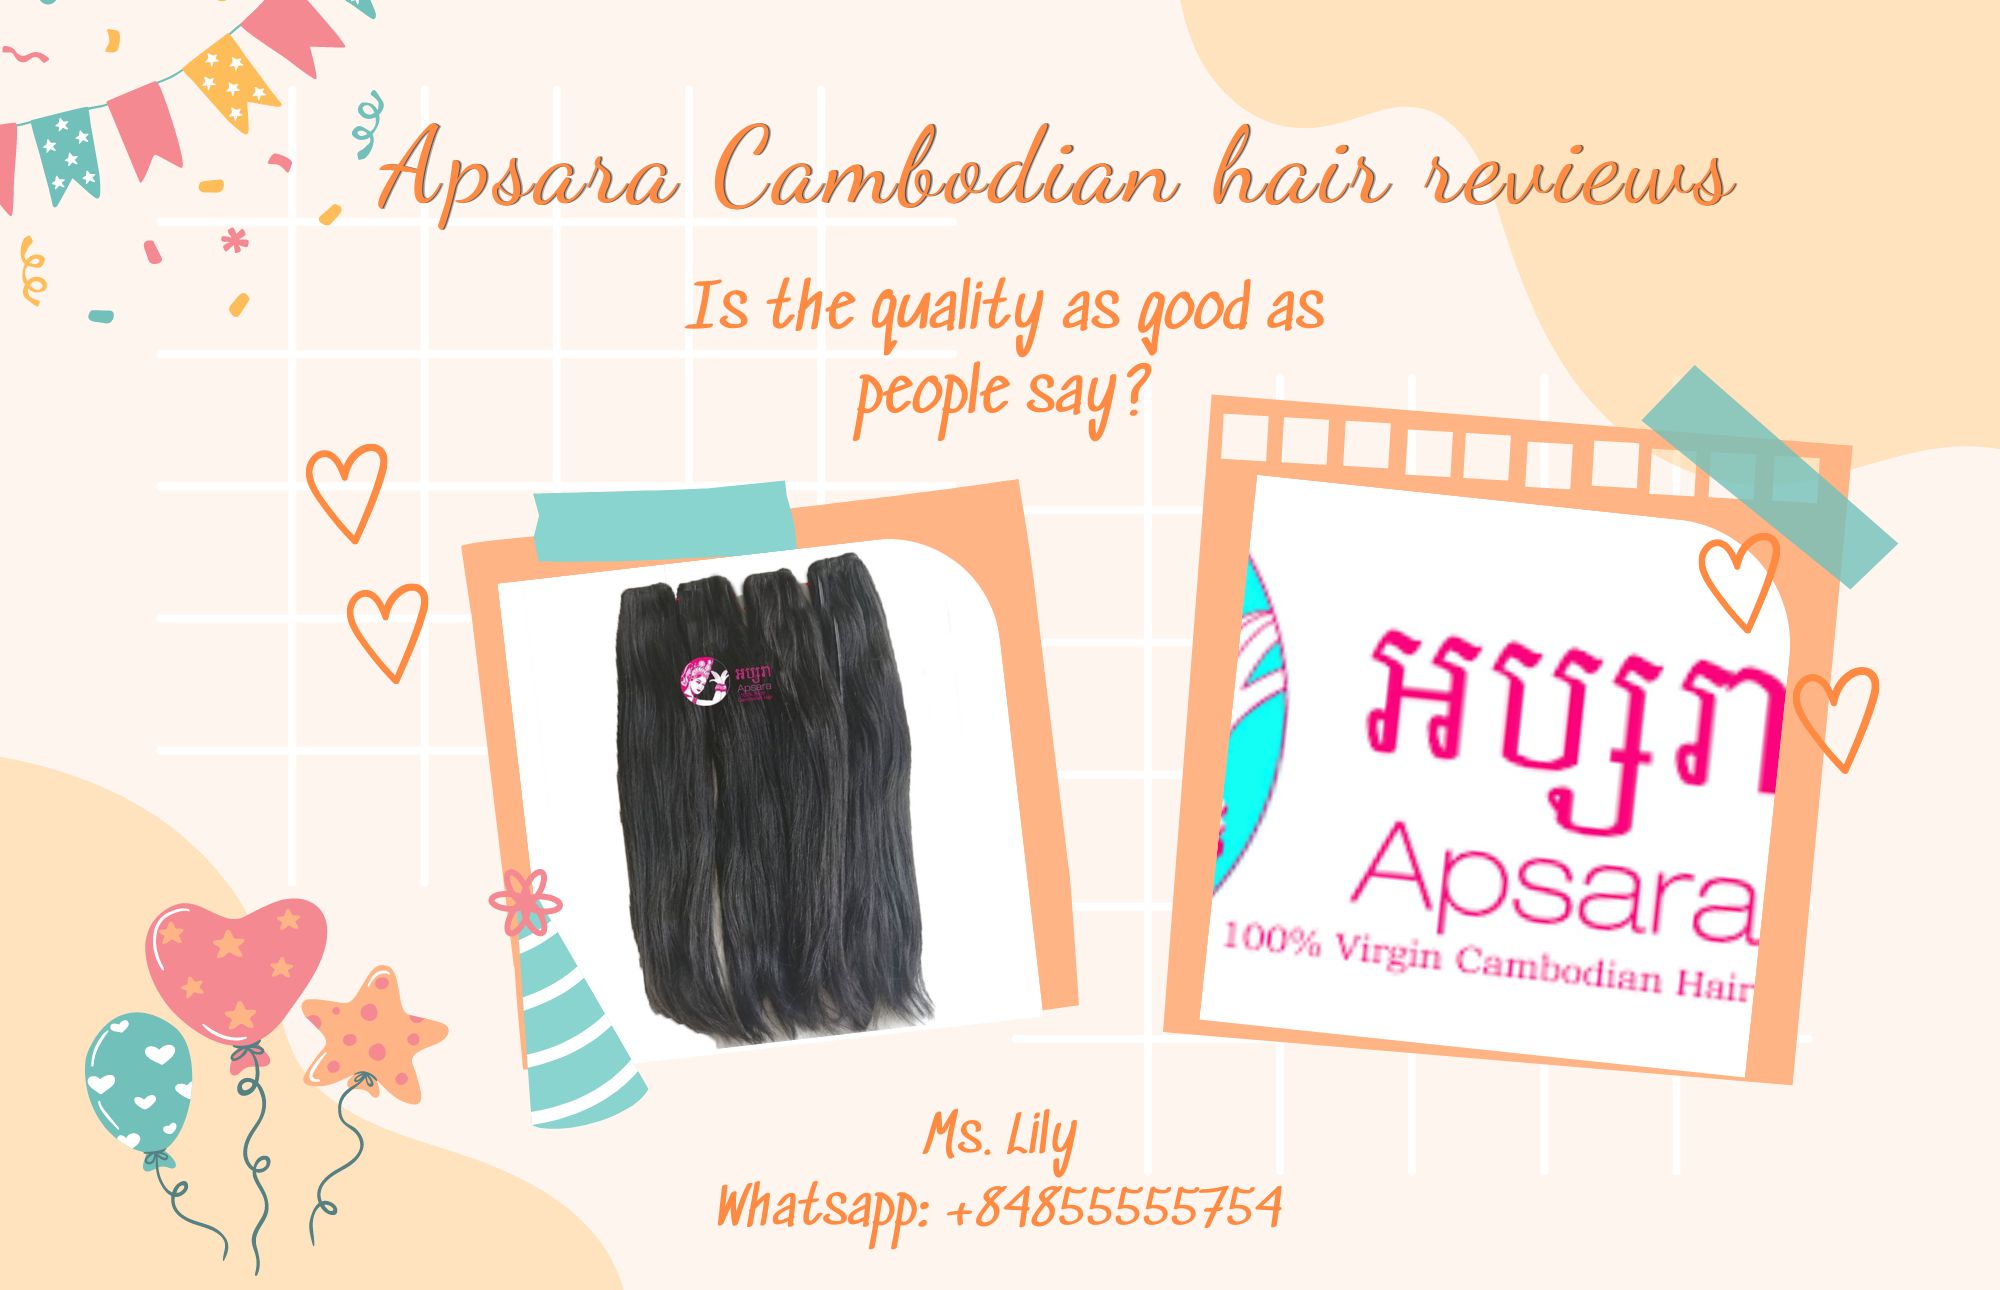 apsara-cambodian-hair-reviews-is-the-quality-as-good-as-people-say